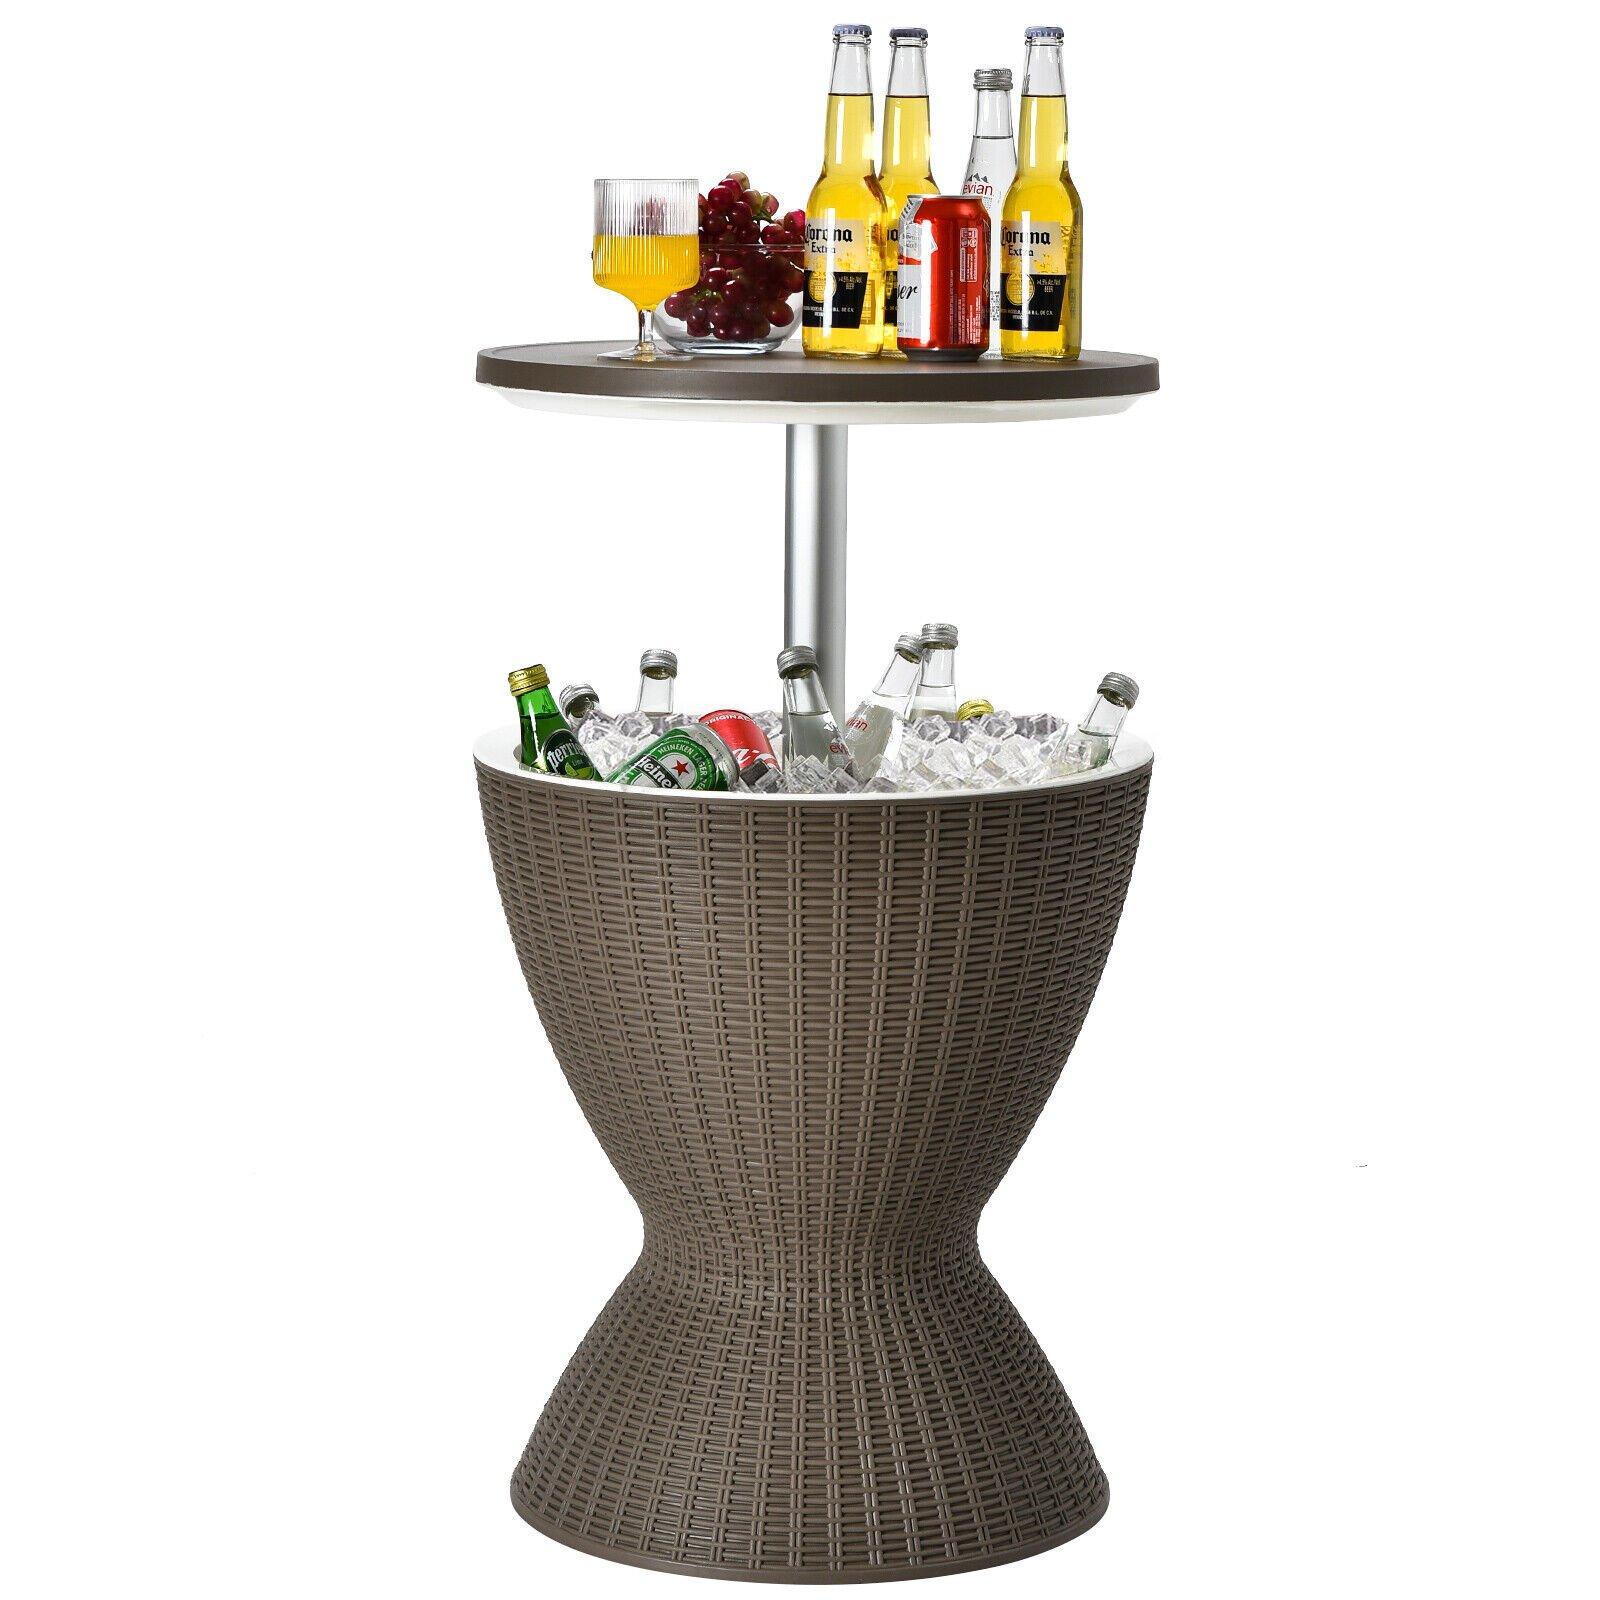 30L Patio Ice Cooler Outdoor All-weather Cool Bar Table w/ Extendable Tabletop